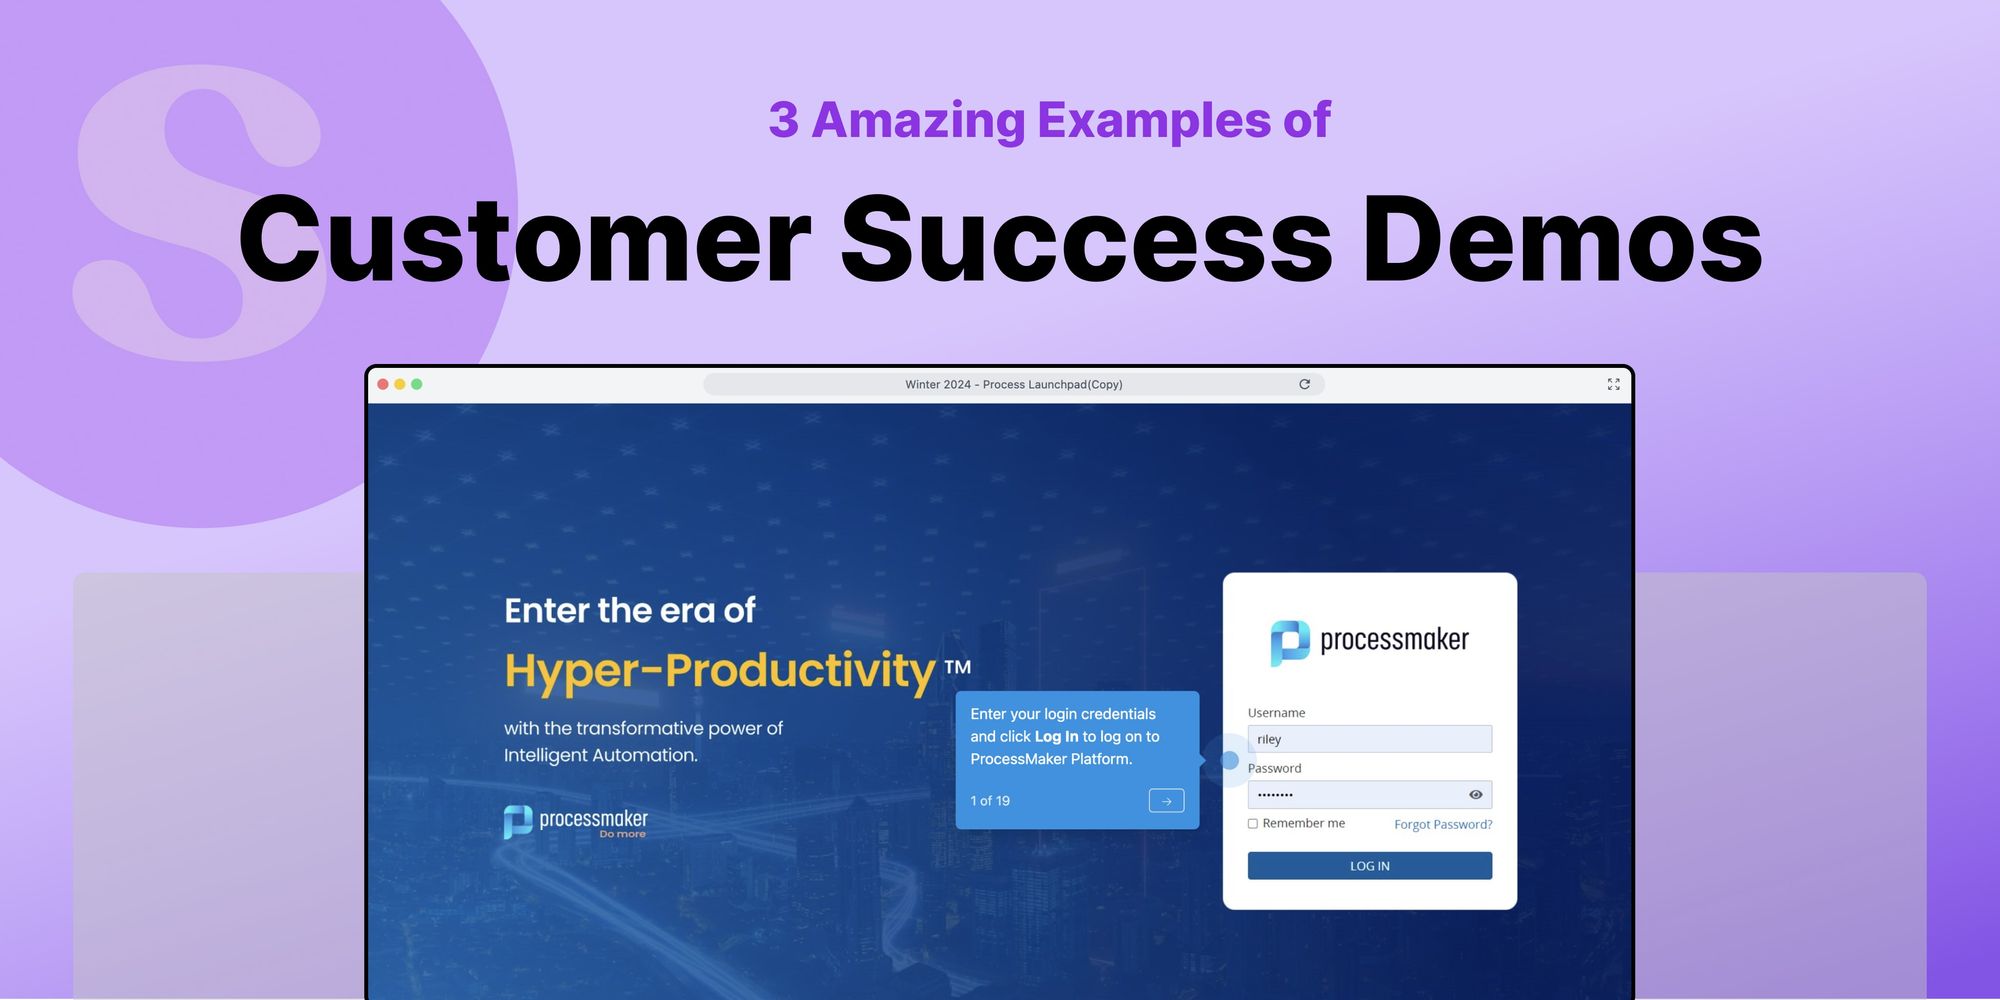 3 Awesome Examples of Interactive Demos for Customer Success